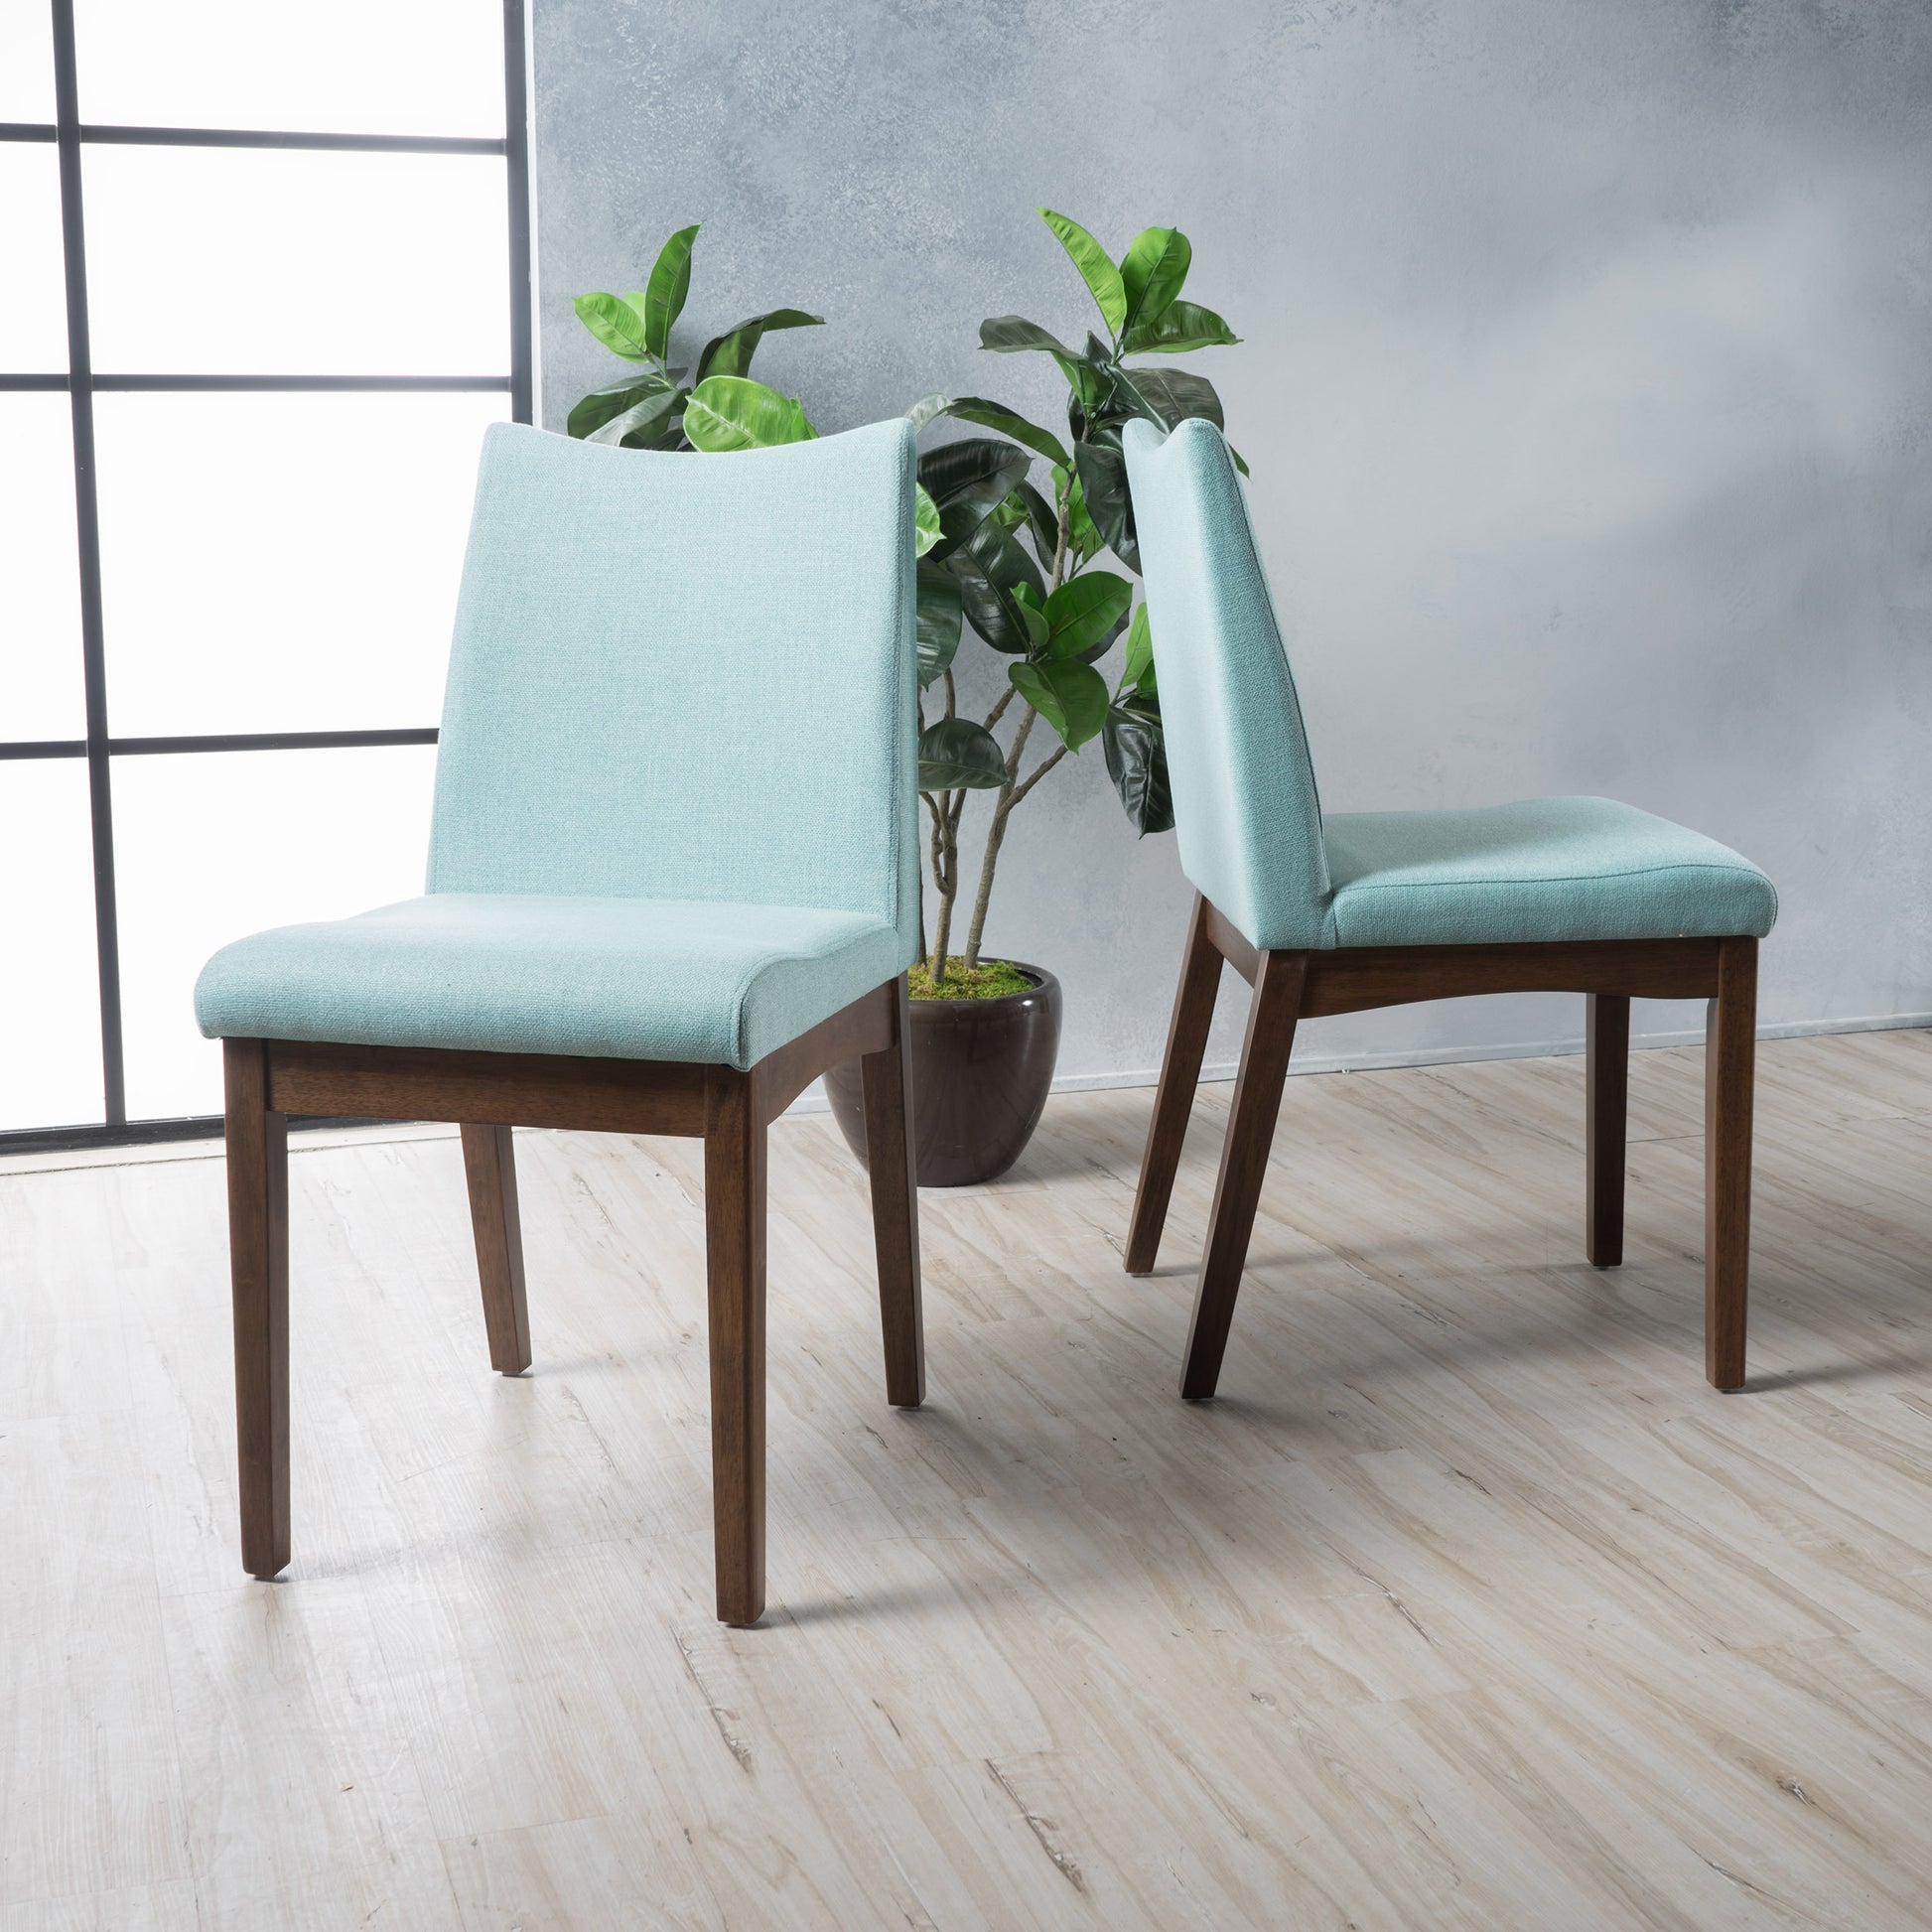 DINING CHAIR Set of 2 mint-fabric